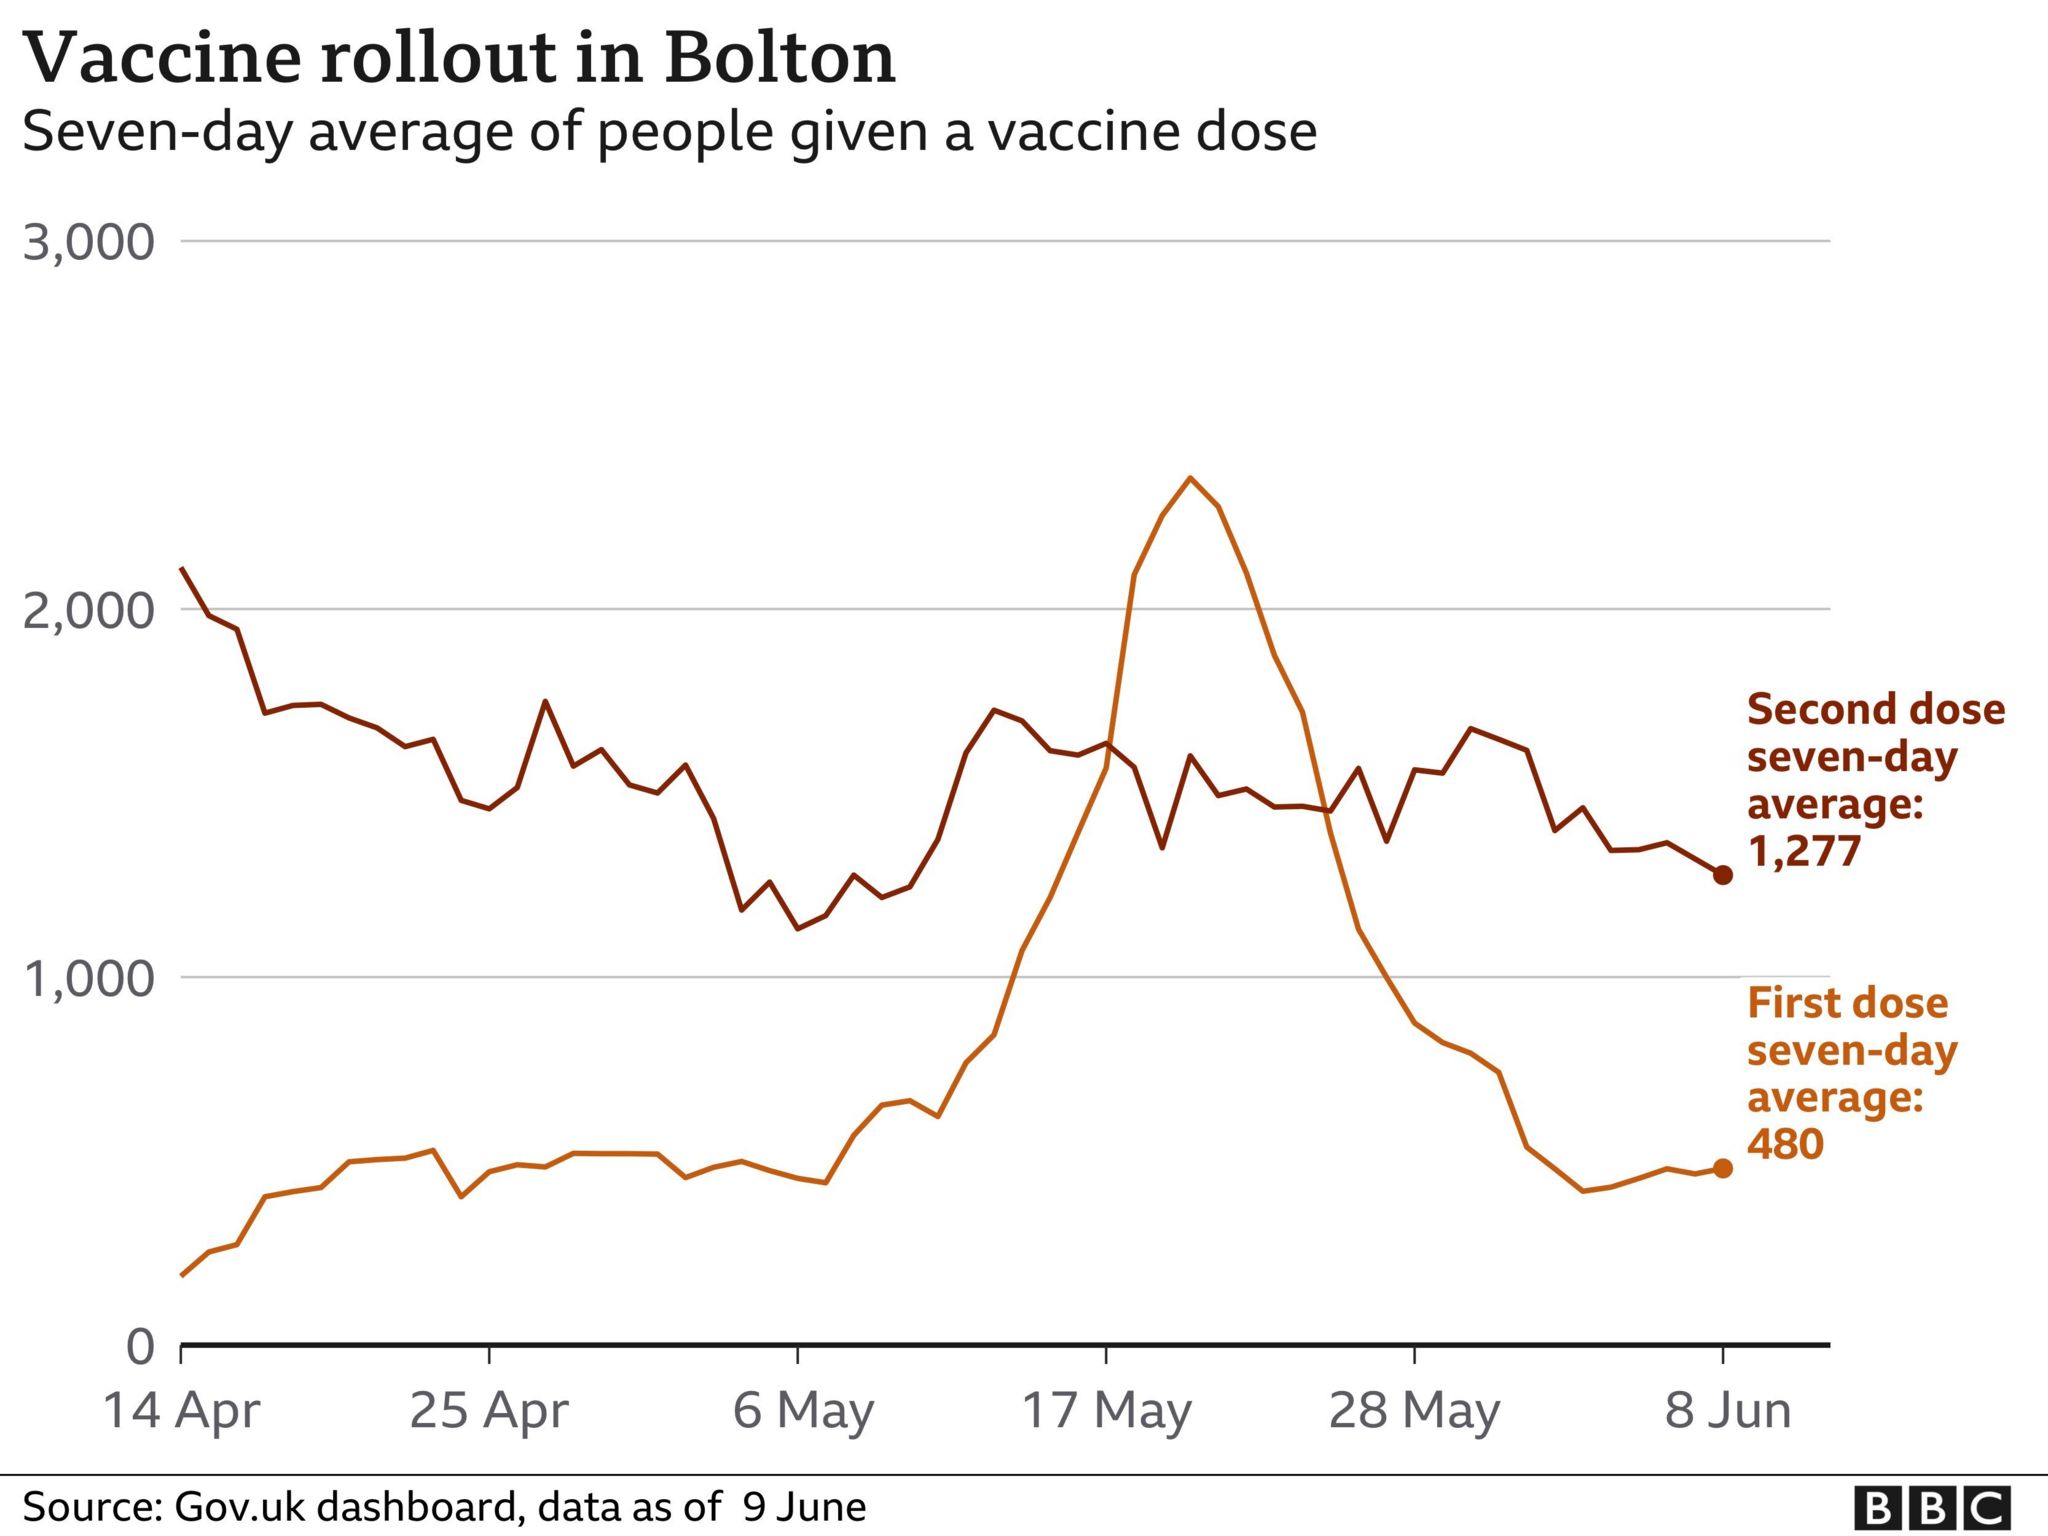 Graph showing vaccine rollout in Bolton